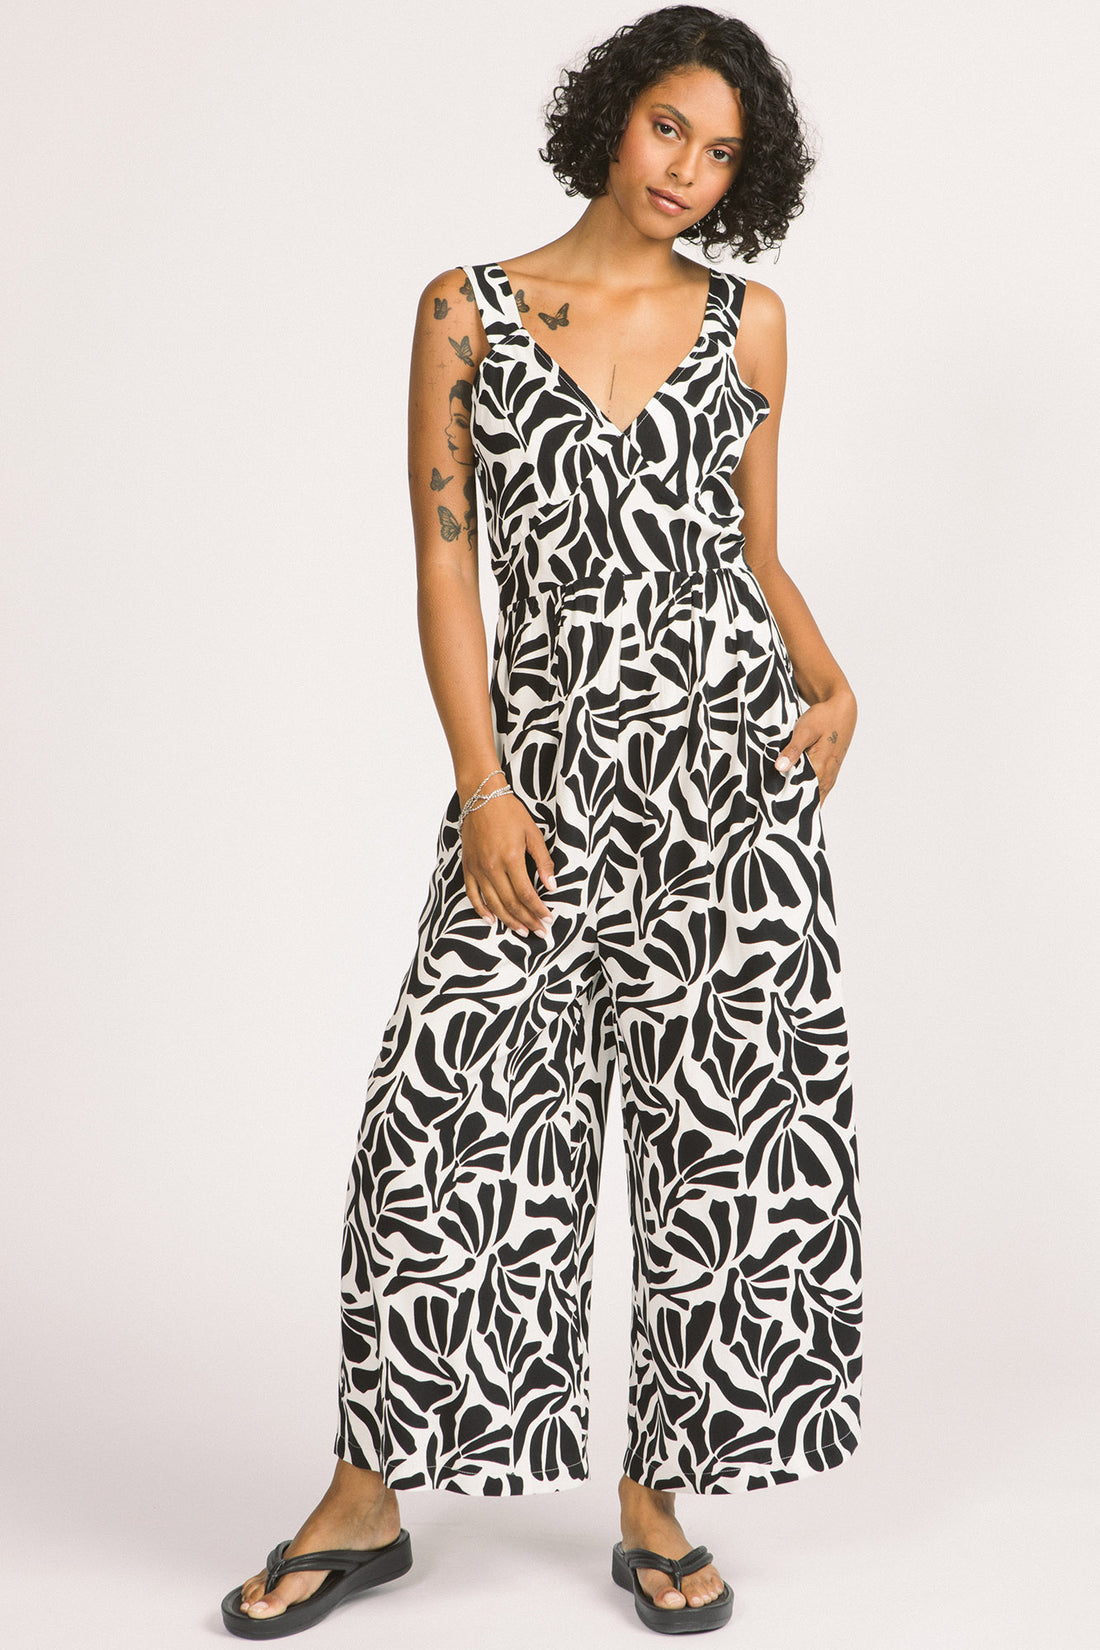 Zadie Jumpsuit by Allison Wonderland, Zebra Leaf, sleeveless, wide straps, V-neck, gathers under bust, fitted waist, wide legs, pockets, eco-fabric, Lenzing Ecovero Viscose, sizes 2-12, made in Vancouver